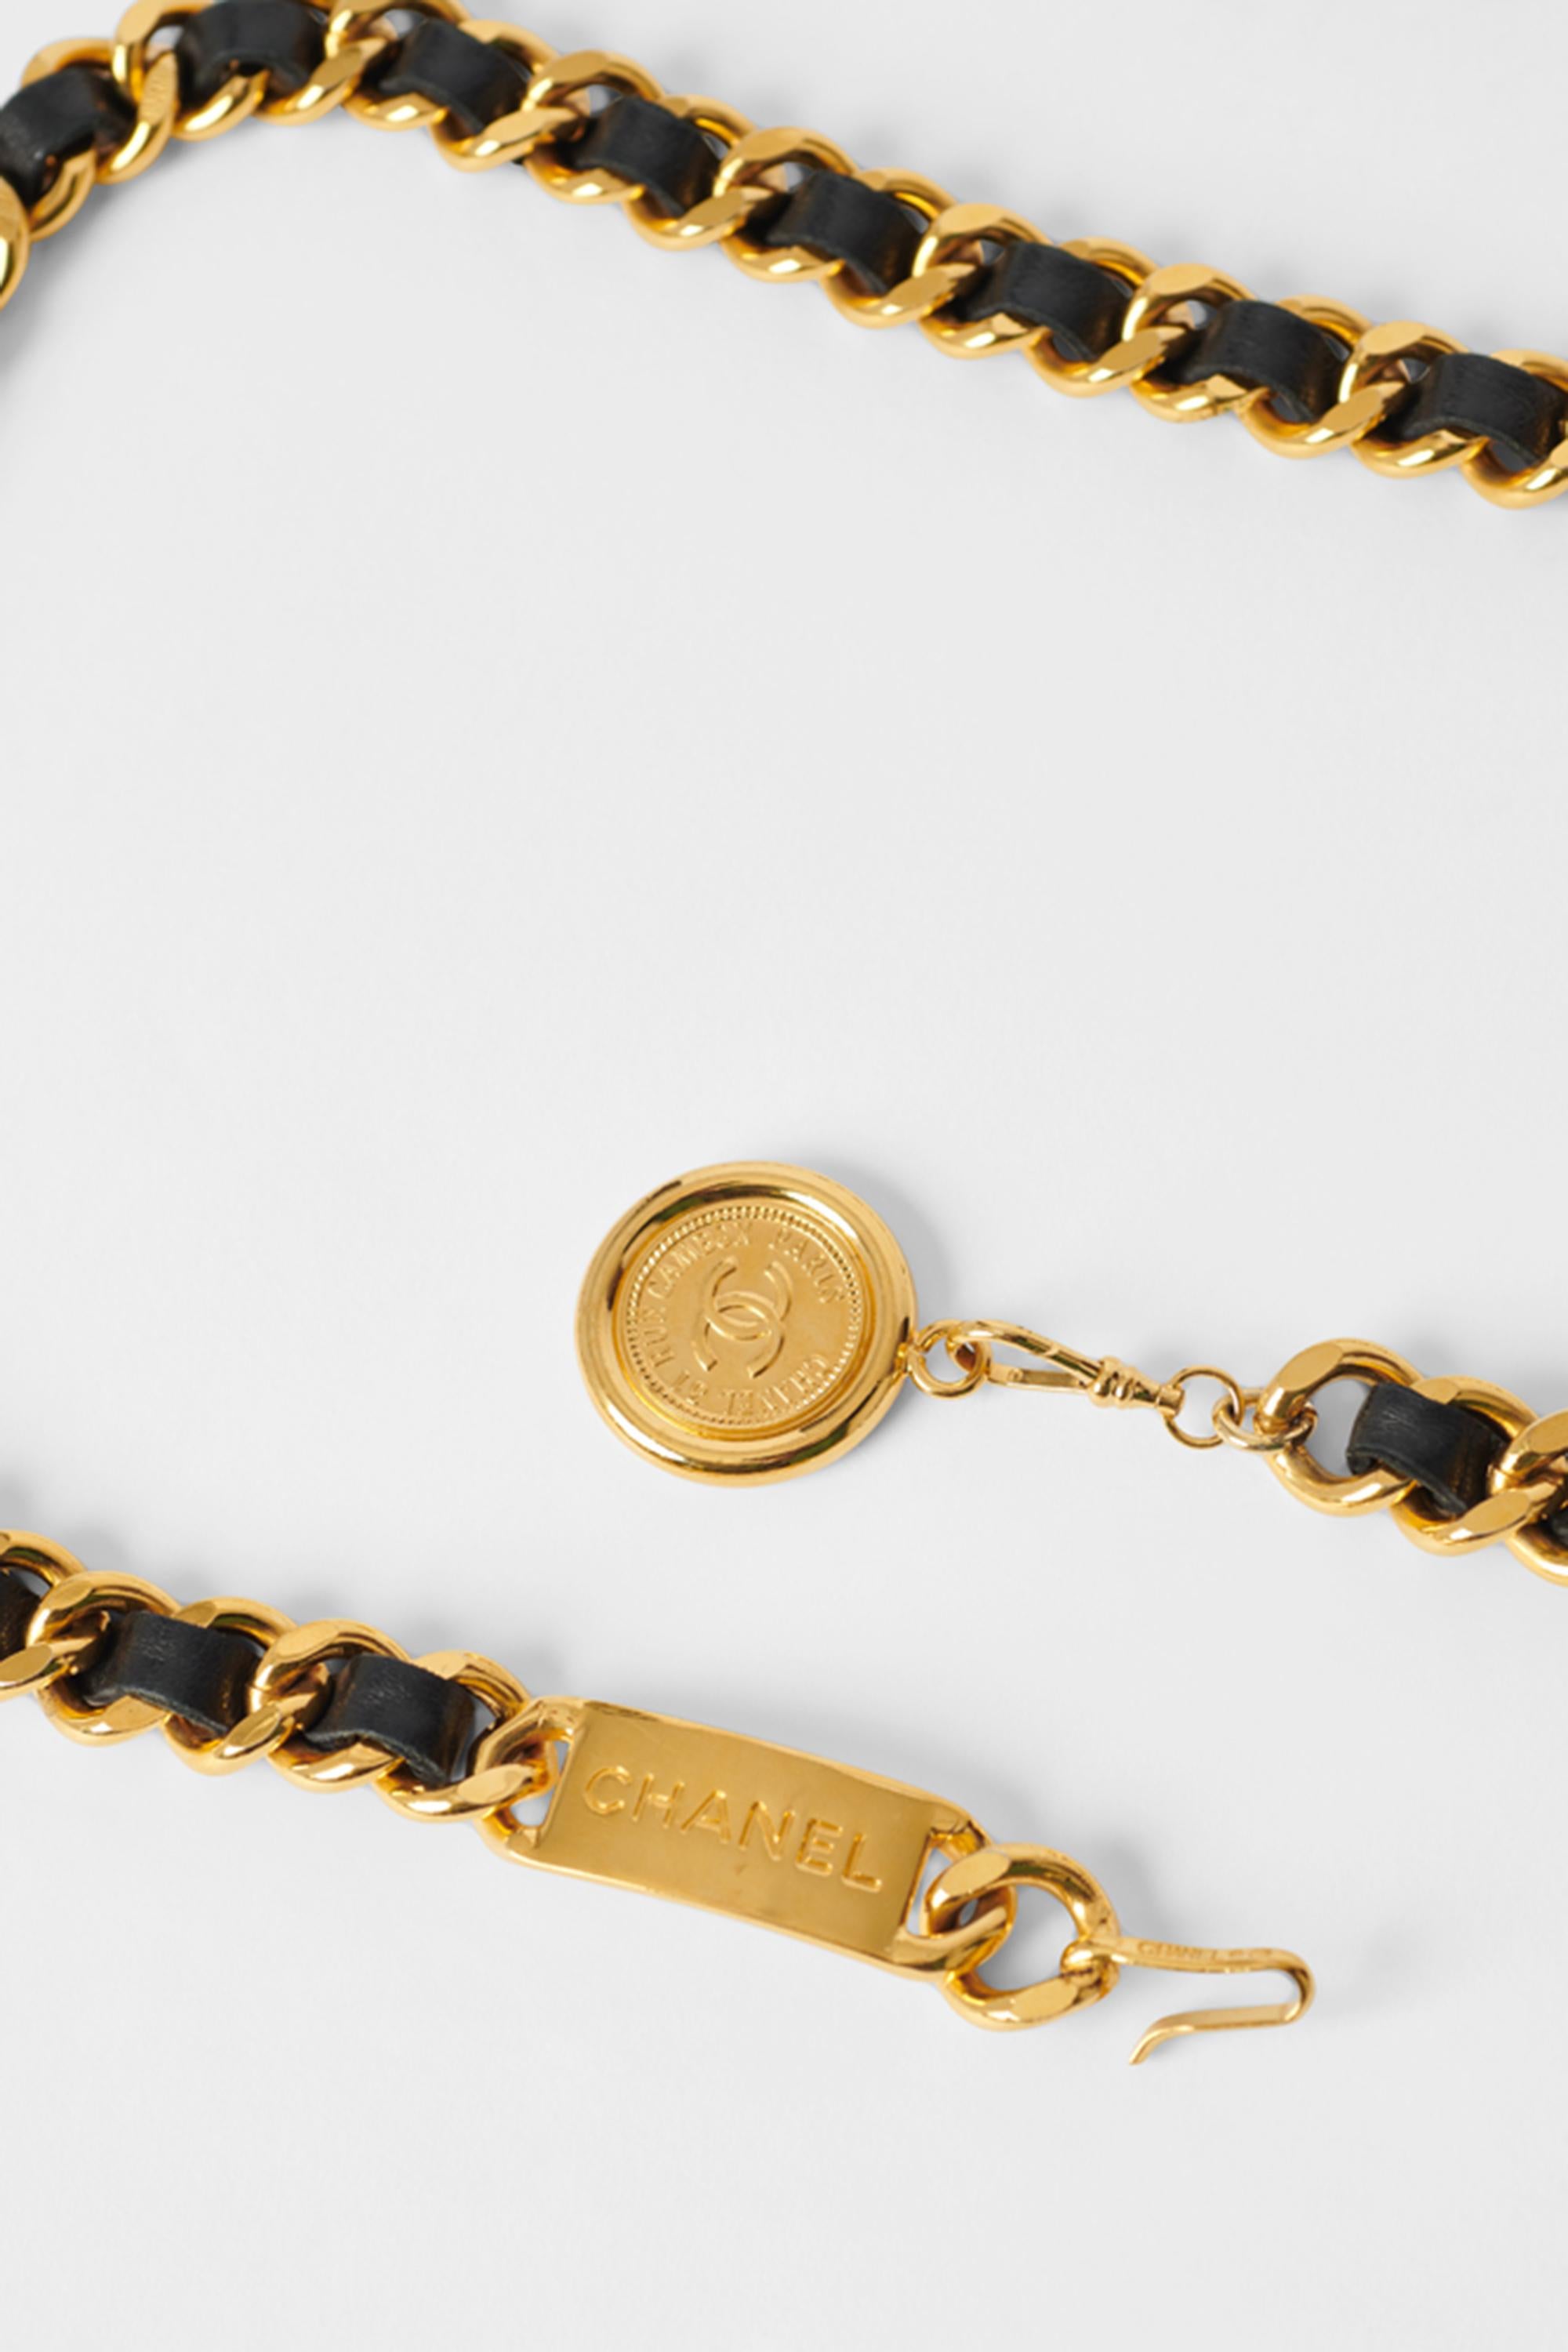 Chanel Spring Summer 1988 chunky woven leather and 24k gold plated chain belt. Features Chanel engraved hardware with Parisian address; 31 Rue Cambon Paris. In excellent vintage condition. Comes with original box.

Brand: Chanel
Color: Black
Fabric: